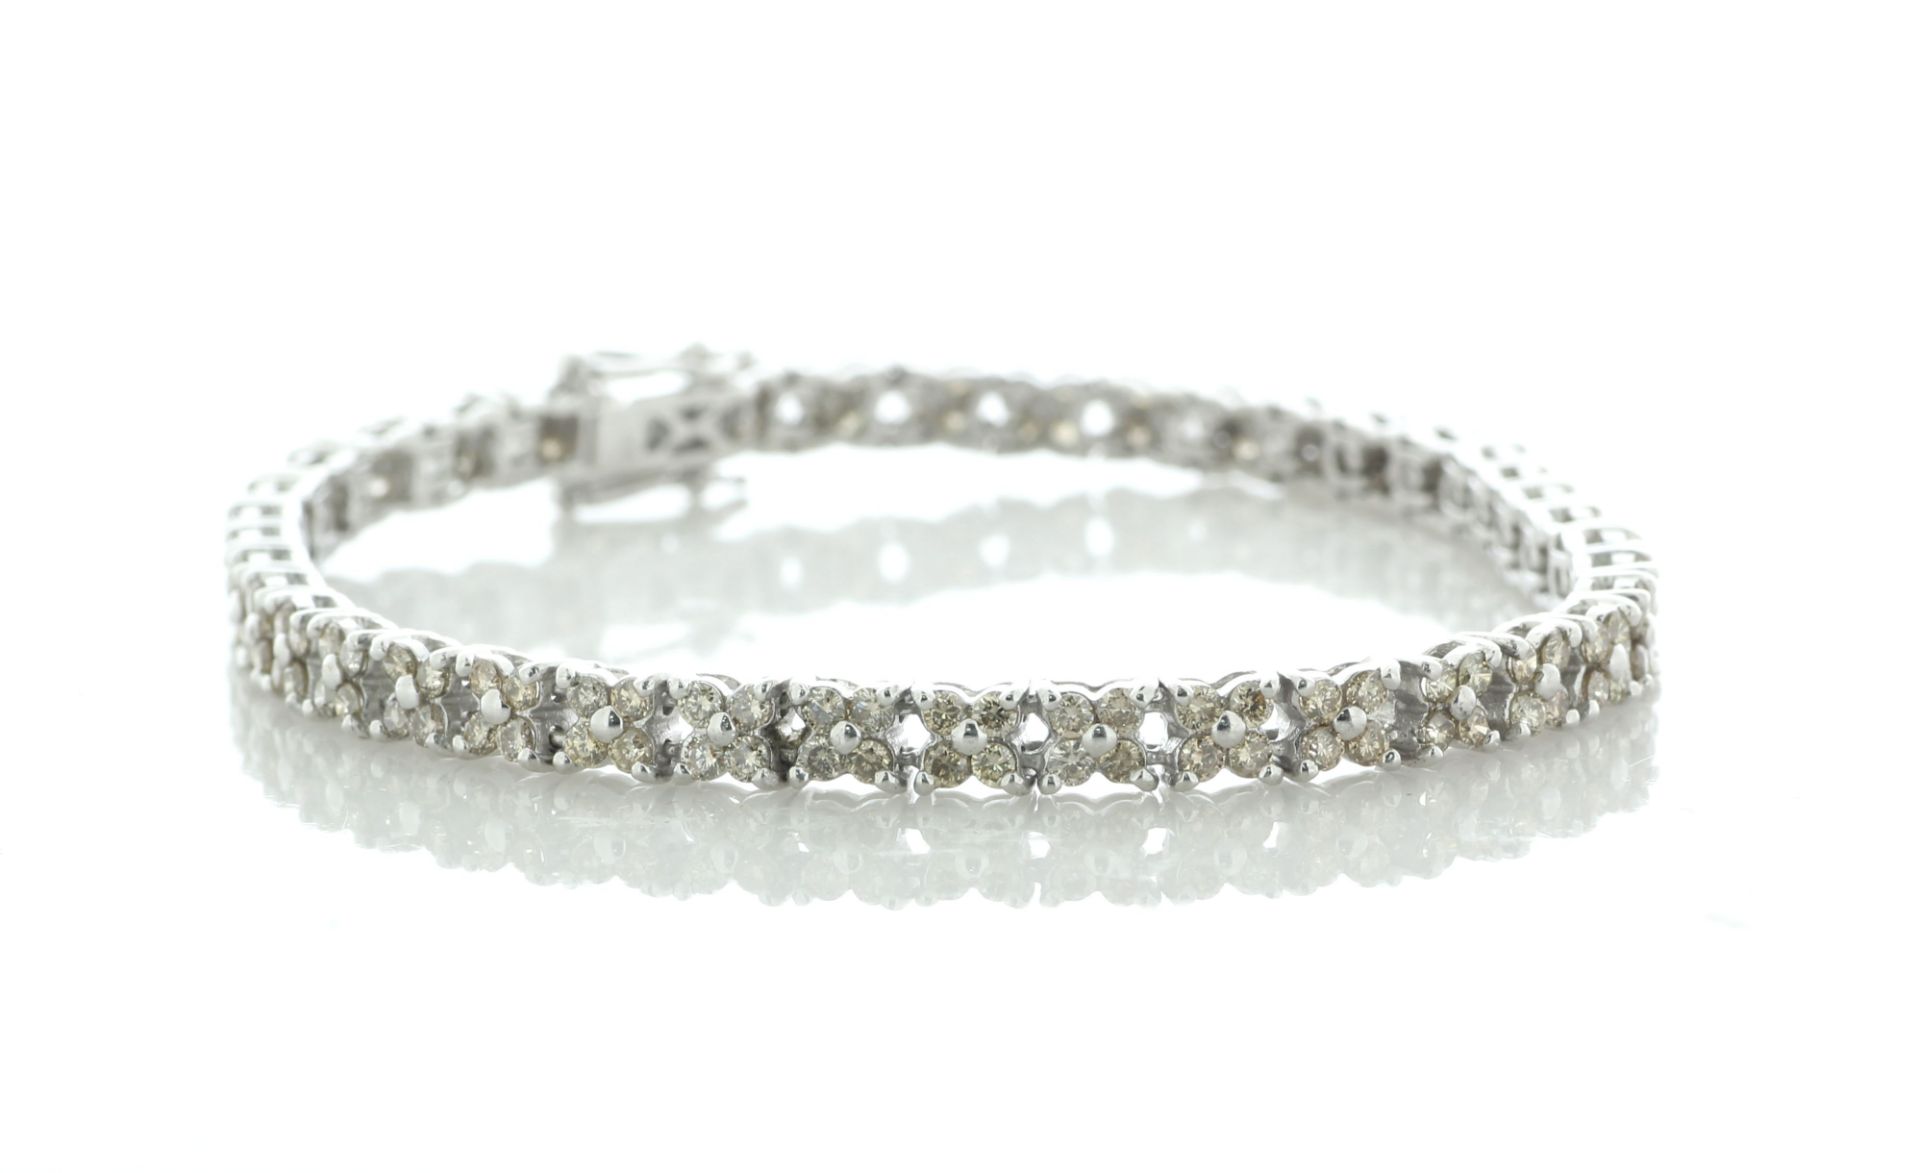 18ct White Gold Tennis Diamond Bracelet 6.5 Inch 3.20 Carats - Valued By AGI £9,600.00 - One hundred